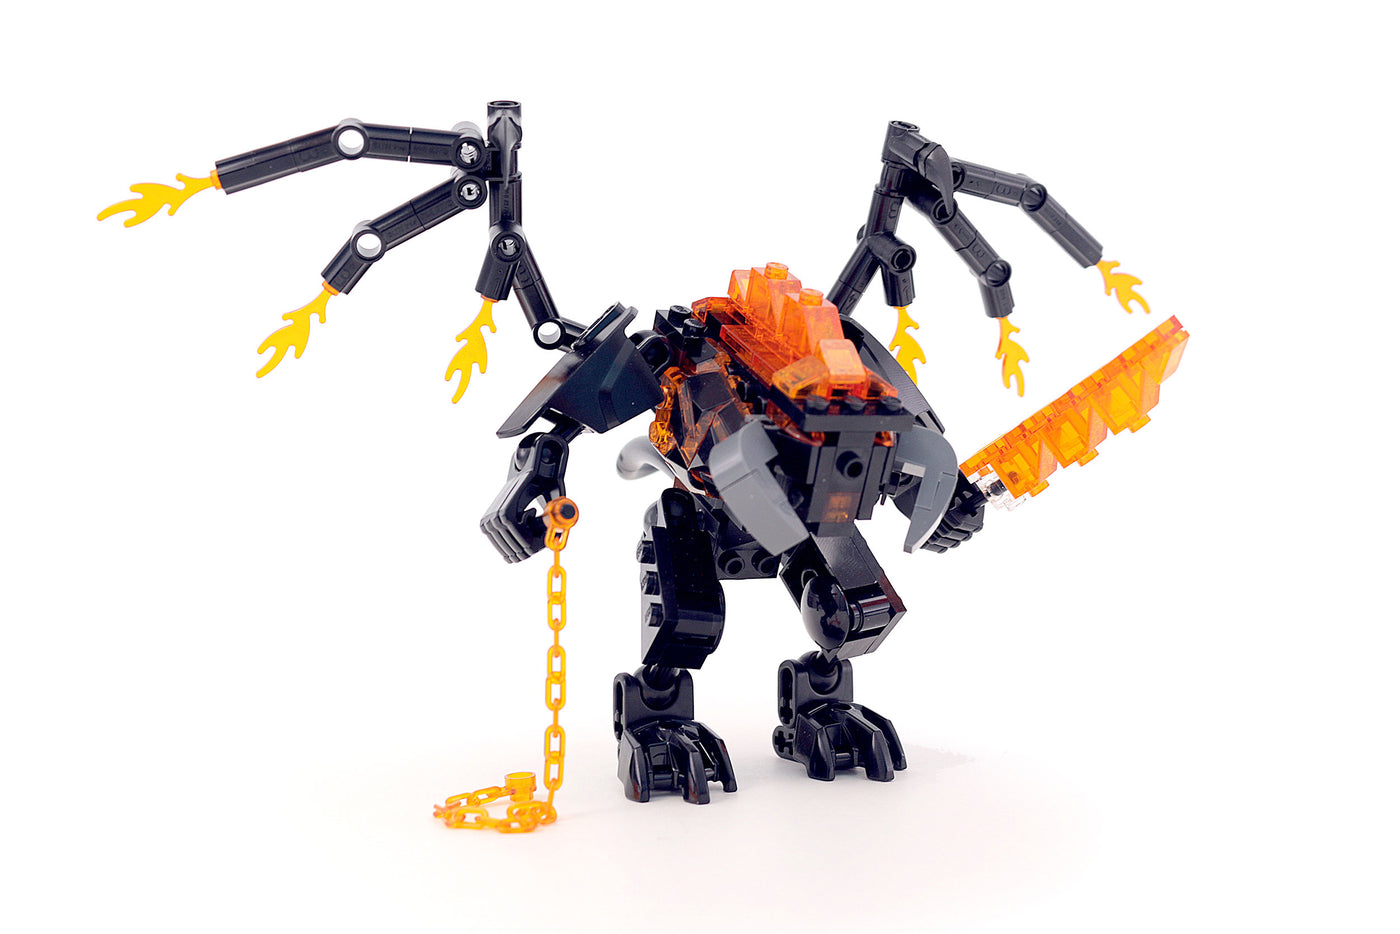 Instructions for LEGO Lord of the Rings Balrog Battle – B3 Customs